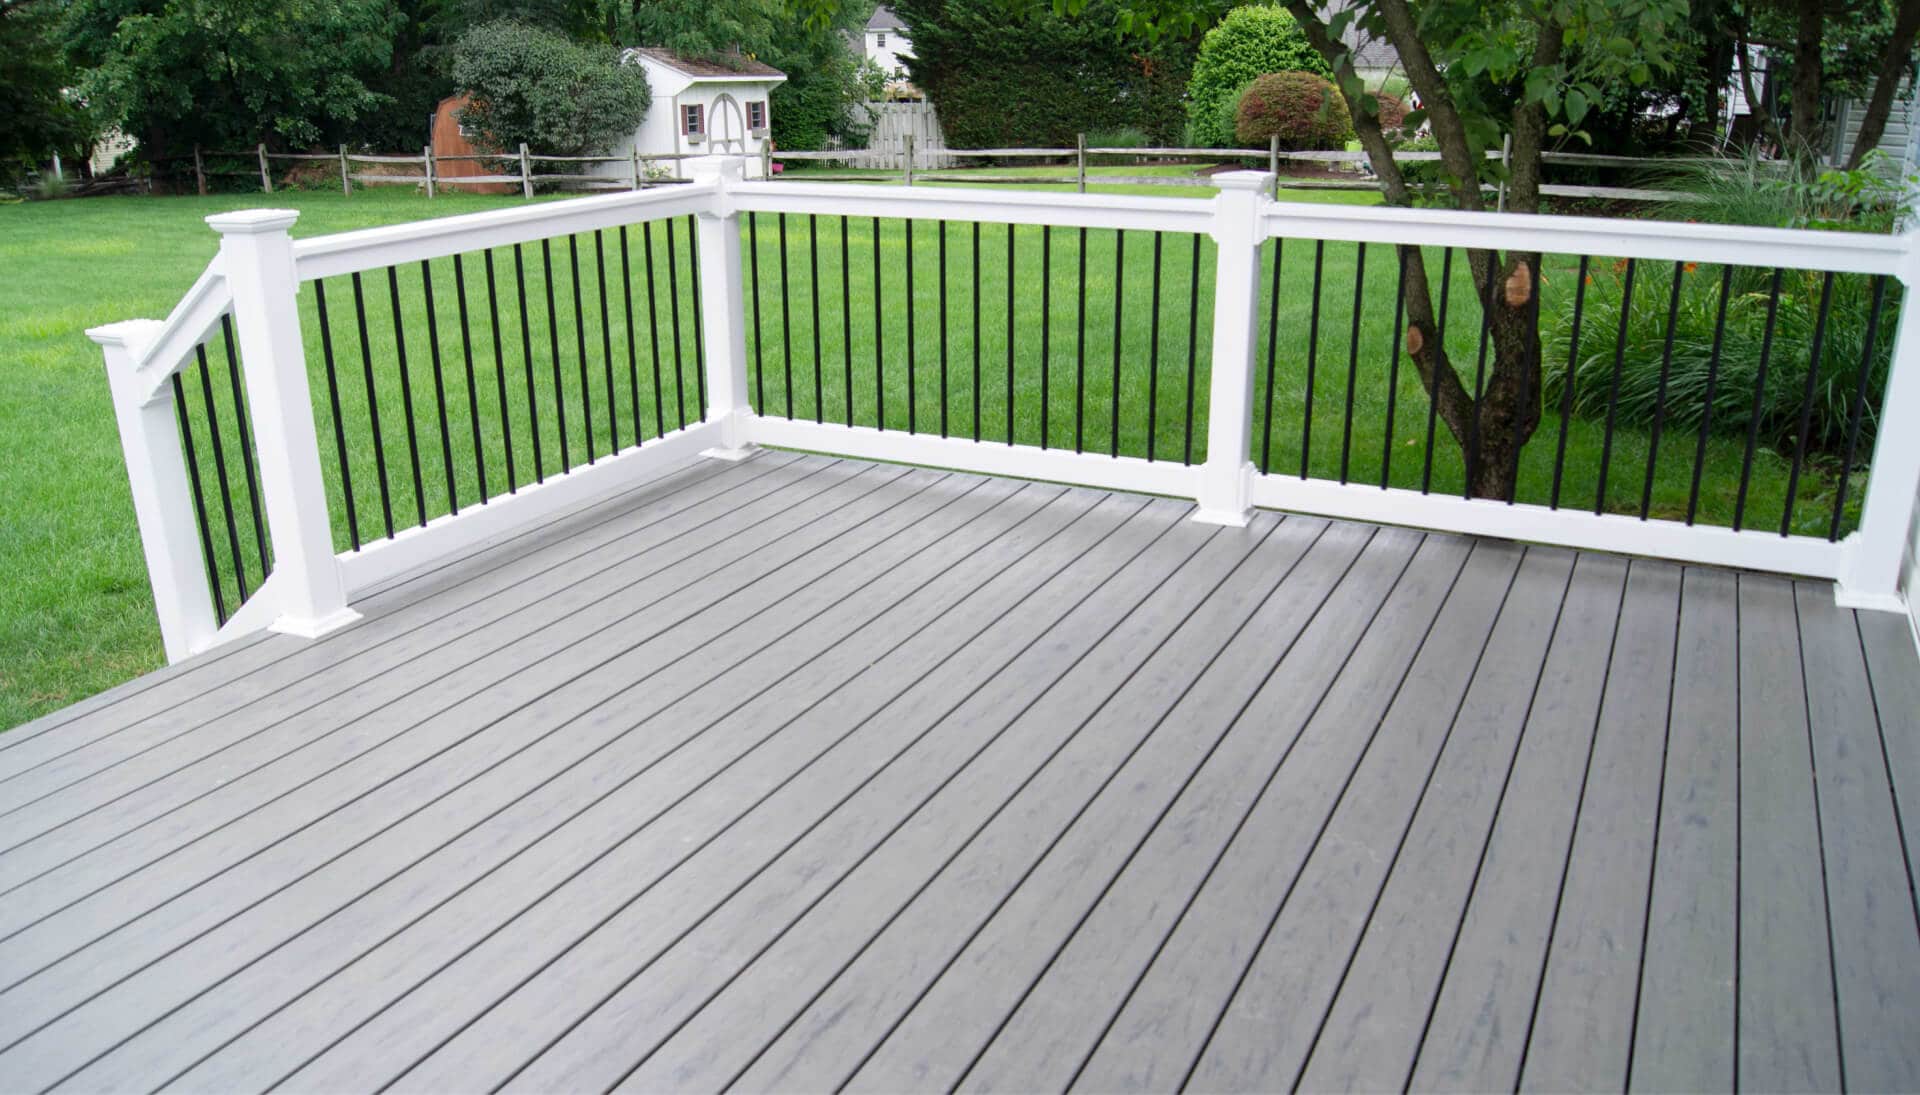 Specialists in deck railing and covers Rock Hill, South Carolina